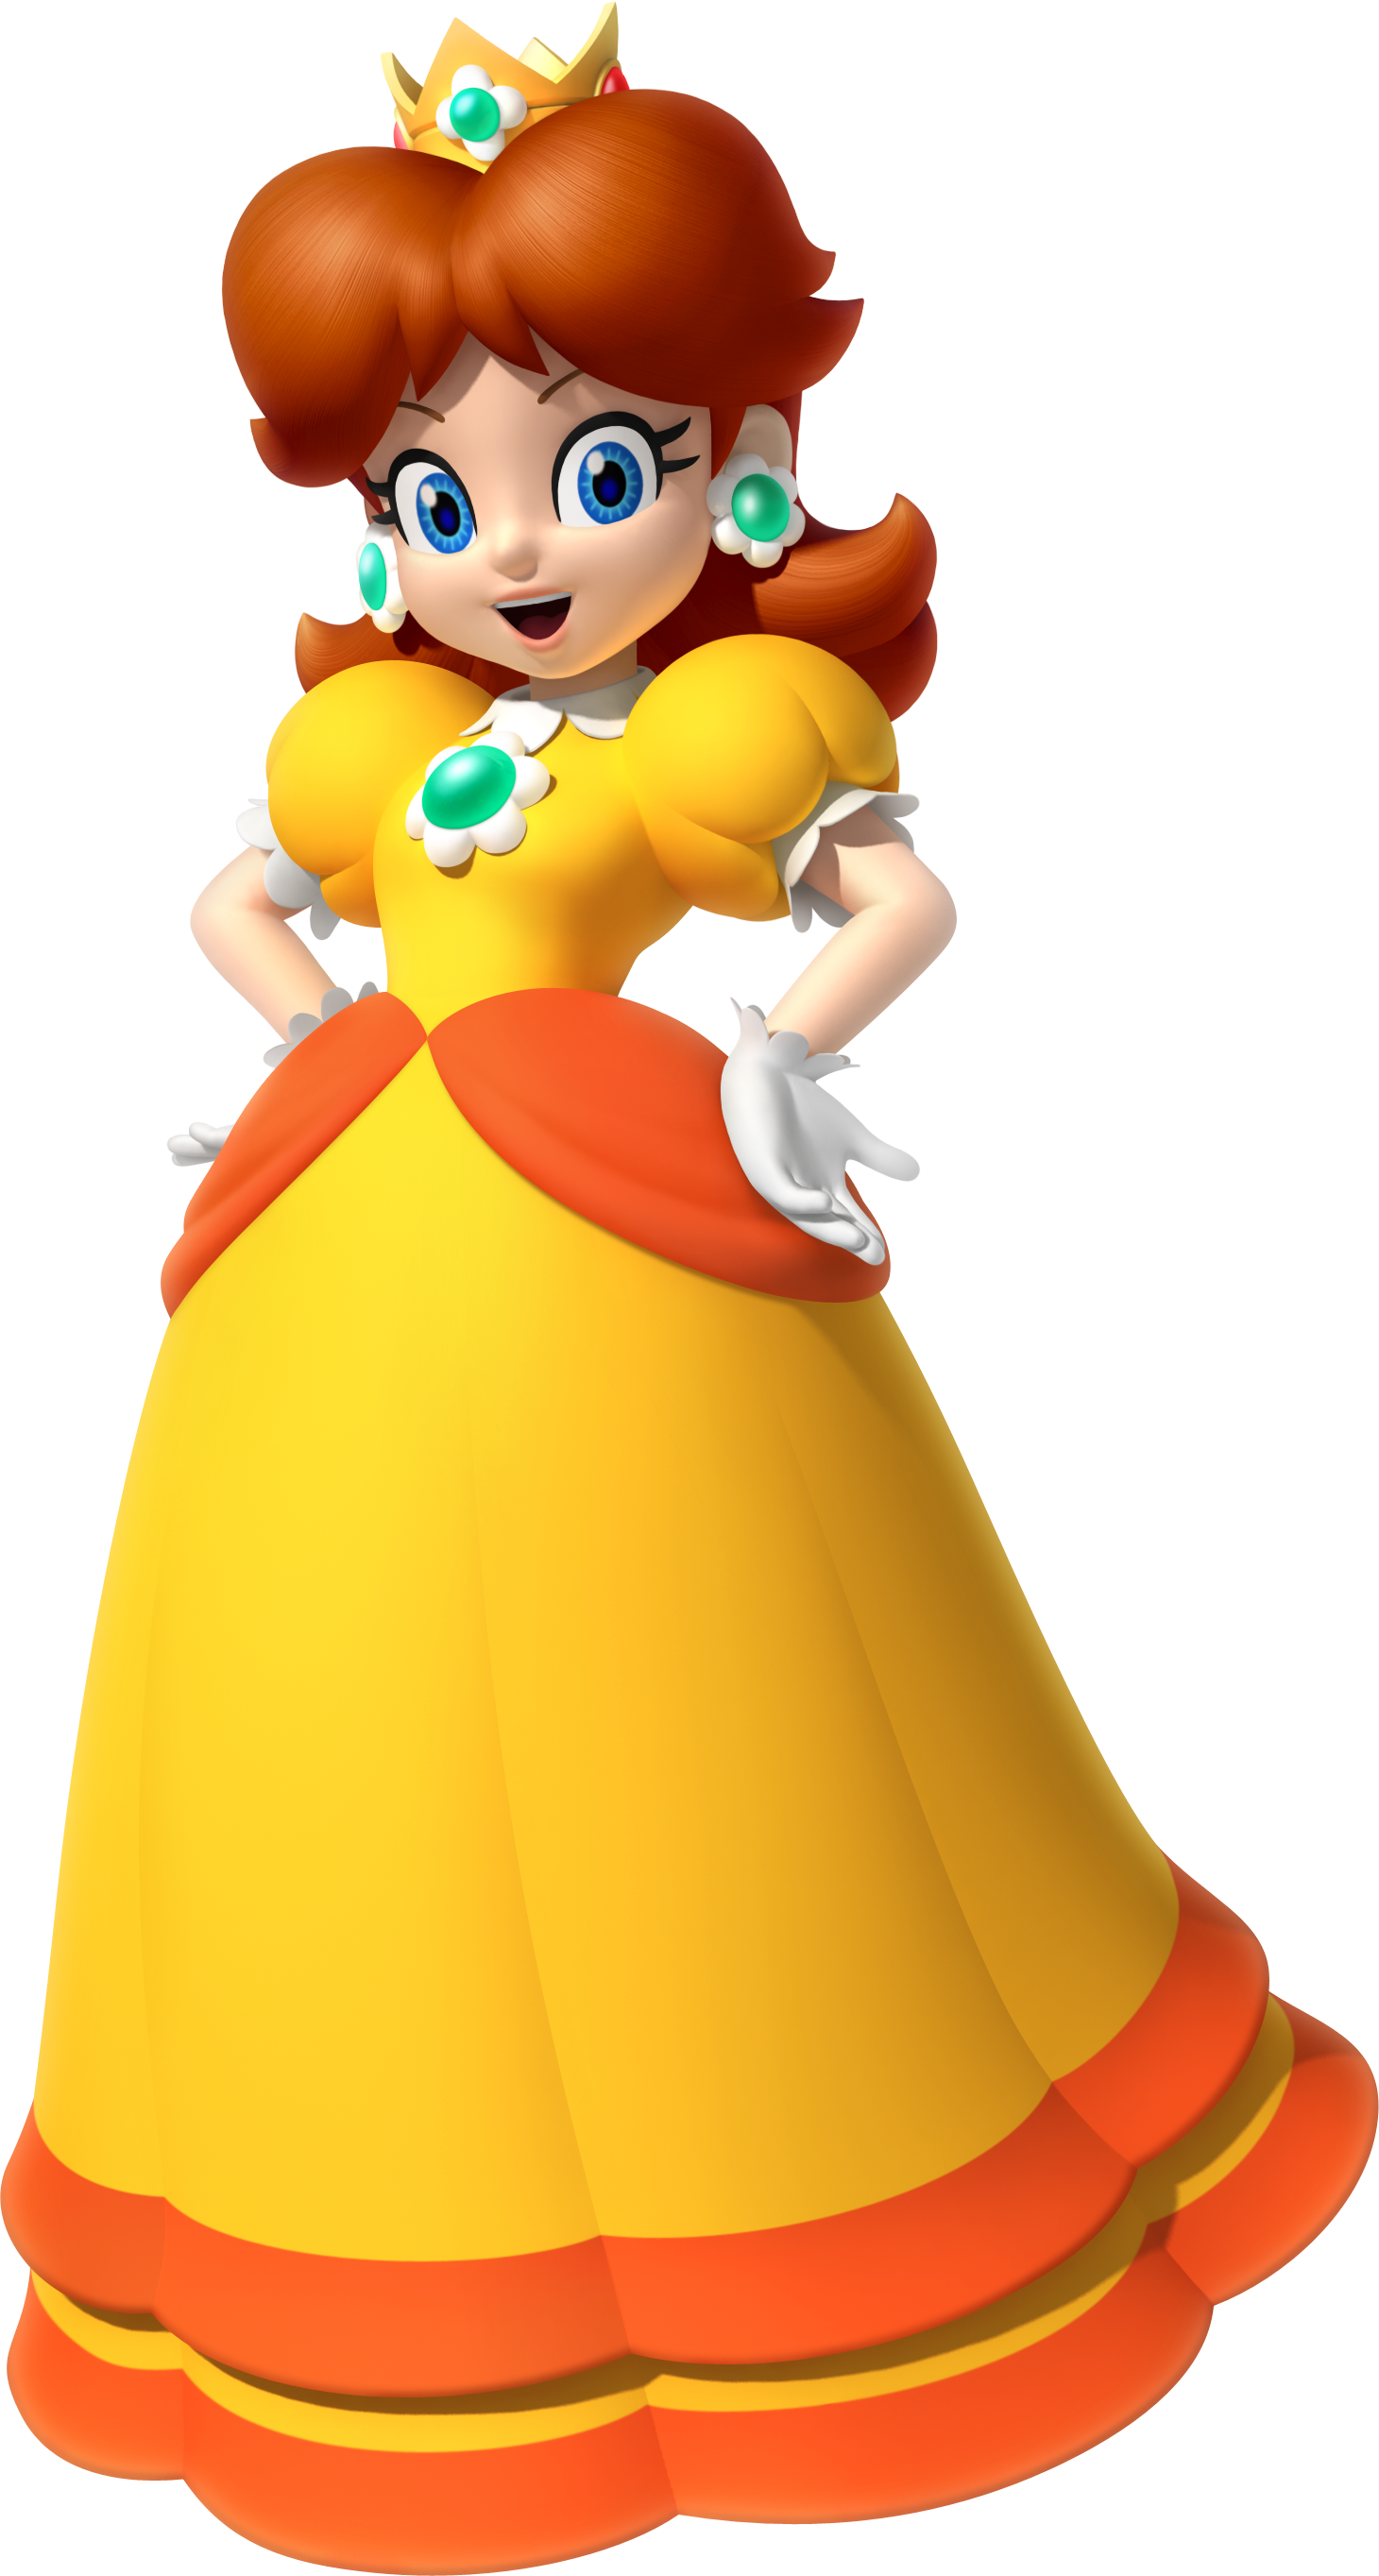 Artwork of Princess Daisy in Mario & Sonic at the London 2012 Olympic Games (later used in Mario Kart 7, Mario Party 10, Super Mario Run and Mario Party: The Top 100)